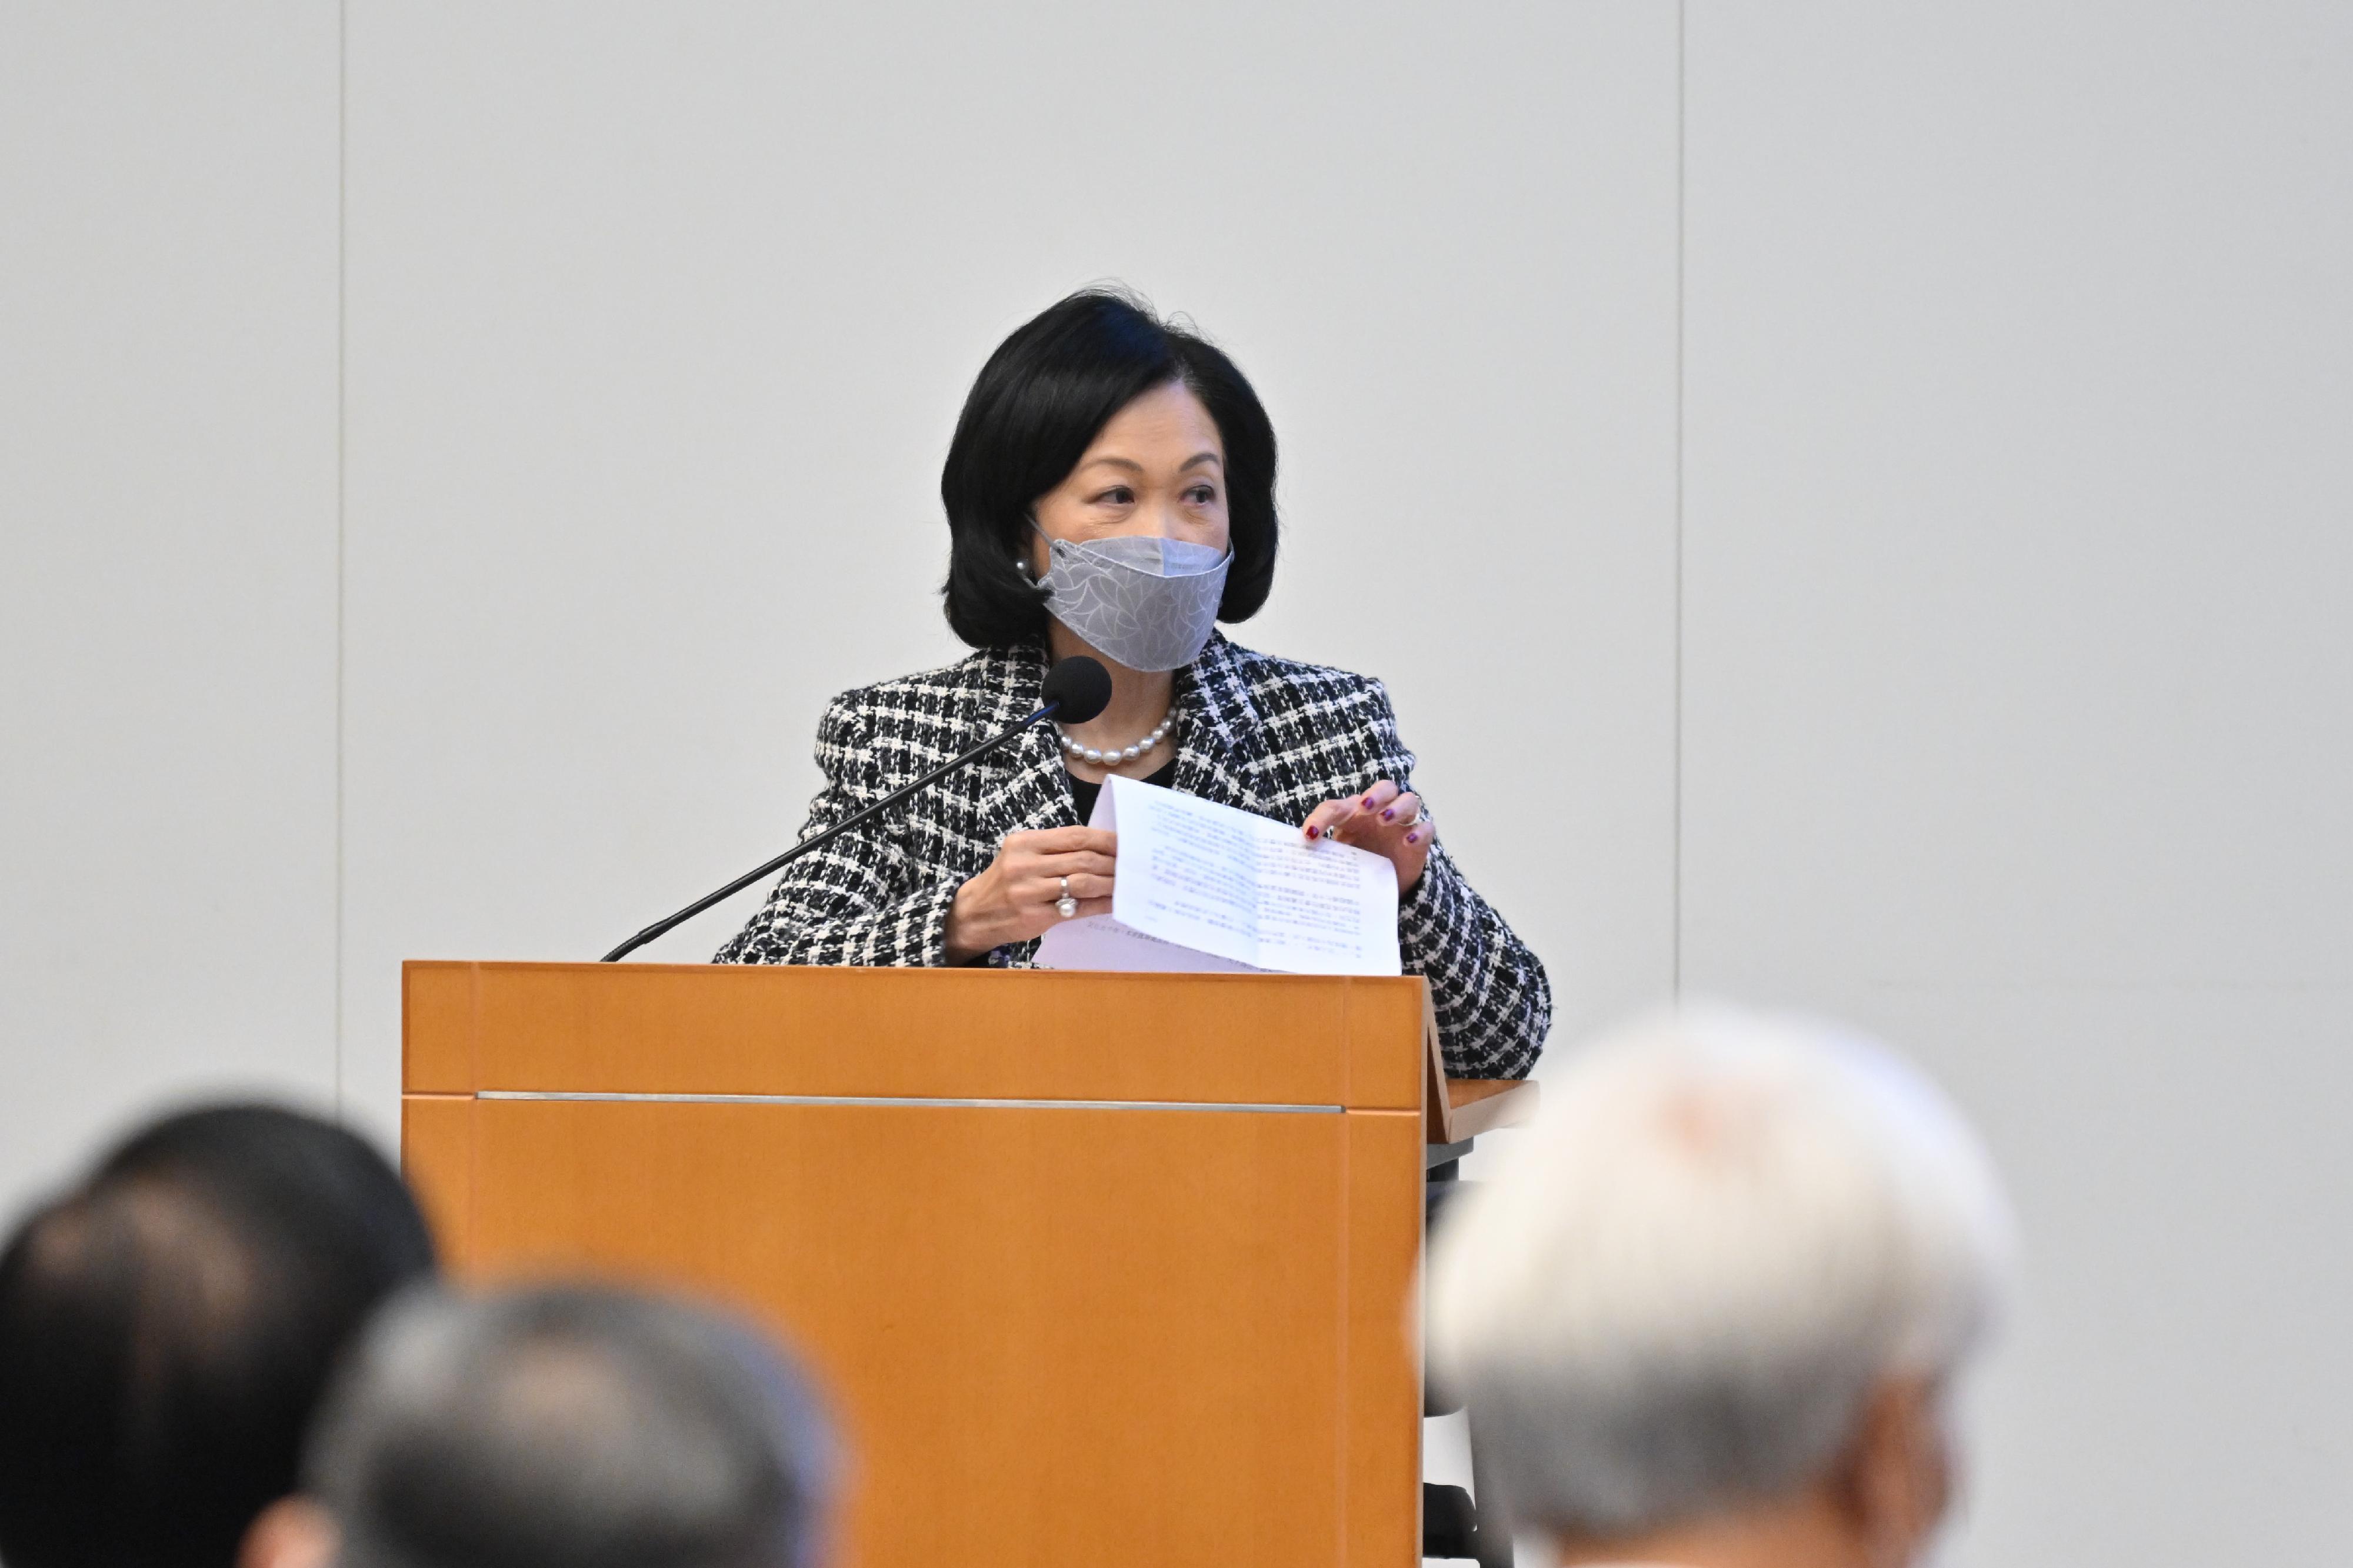 The Hong Kong Special Administrative Region Government today (November 16) held a sharing session on the spirit of the 20th National Congress of the Communist Party of China at the Central Government Offices. Photo shows the Convenor of the Non-official Members of the Executive Council, Mrs Regina Ip, sharing her views.